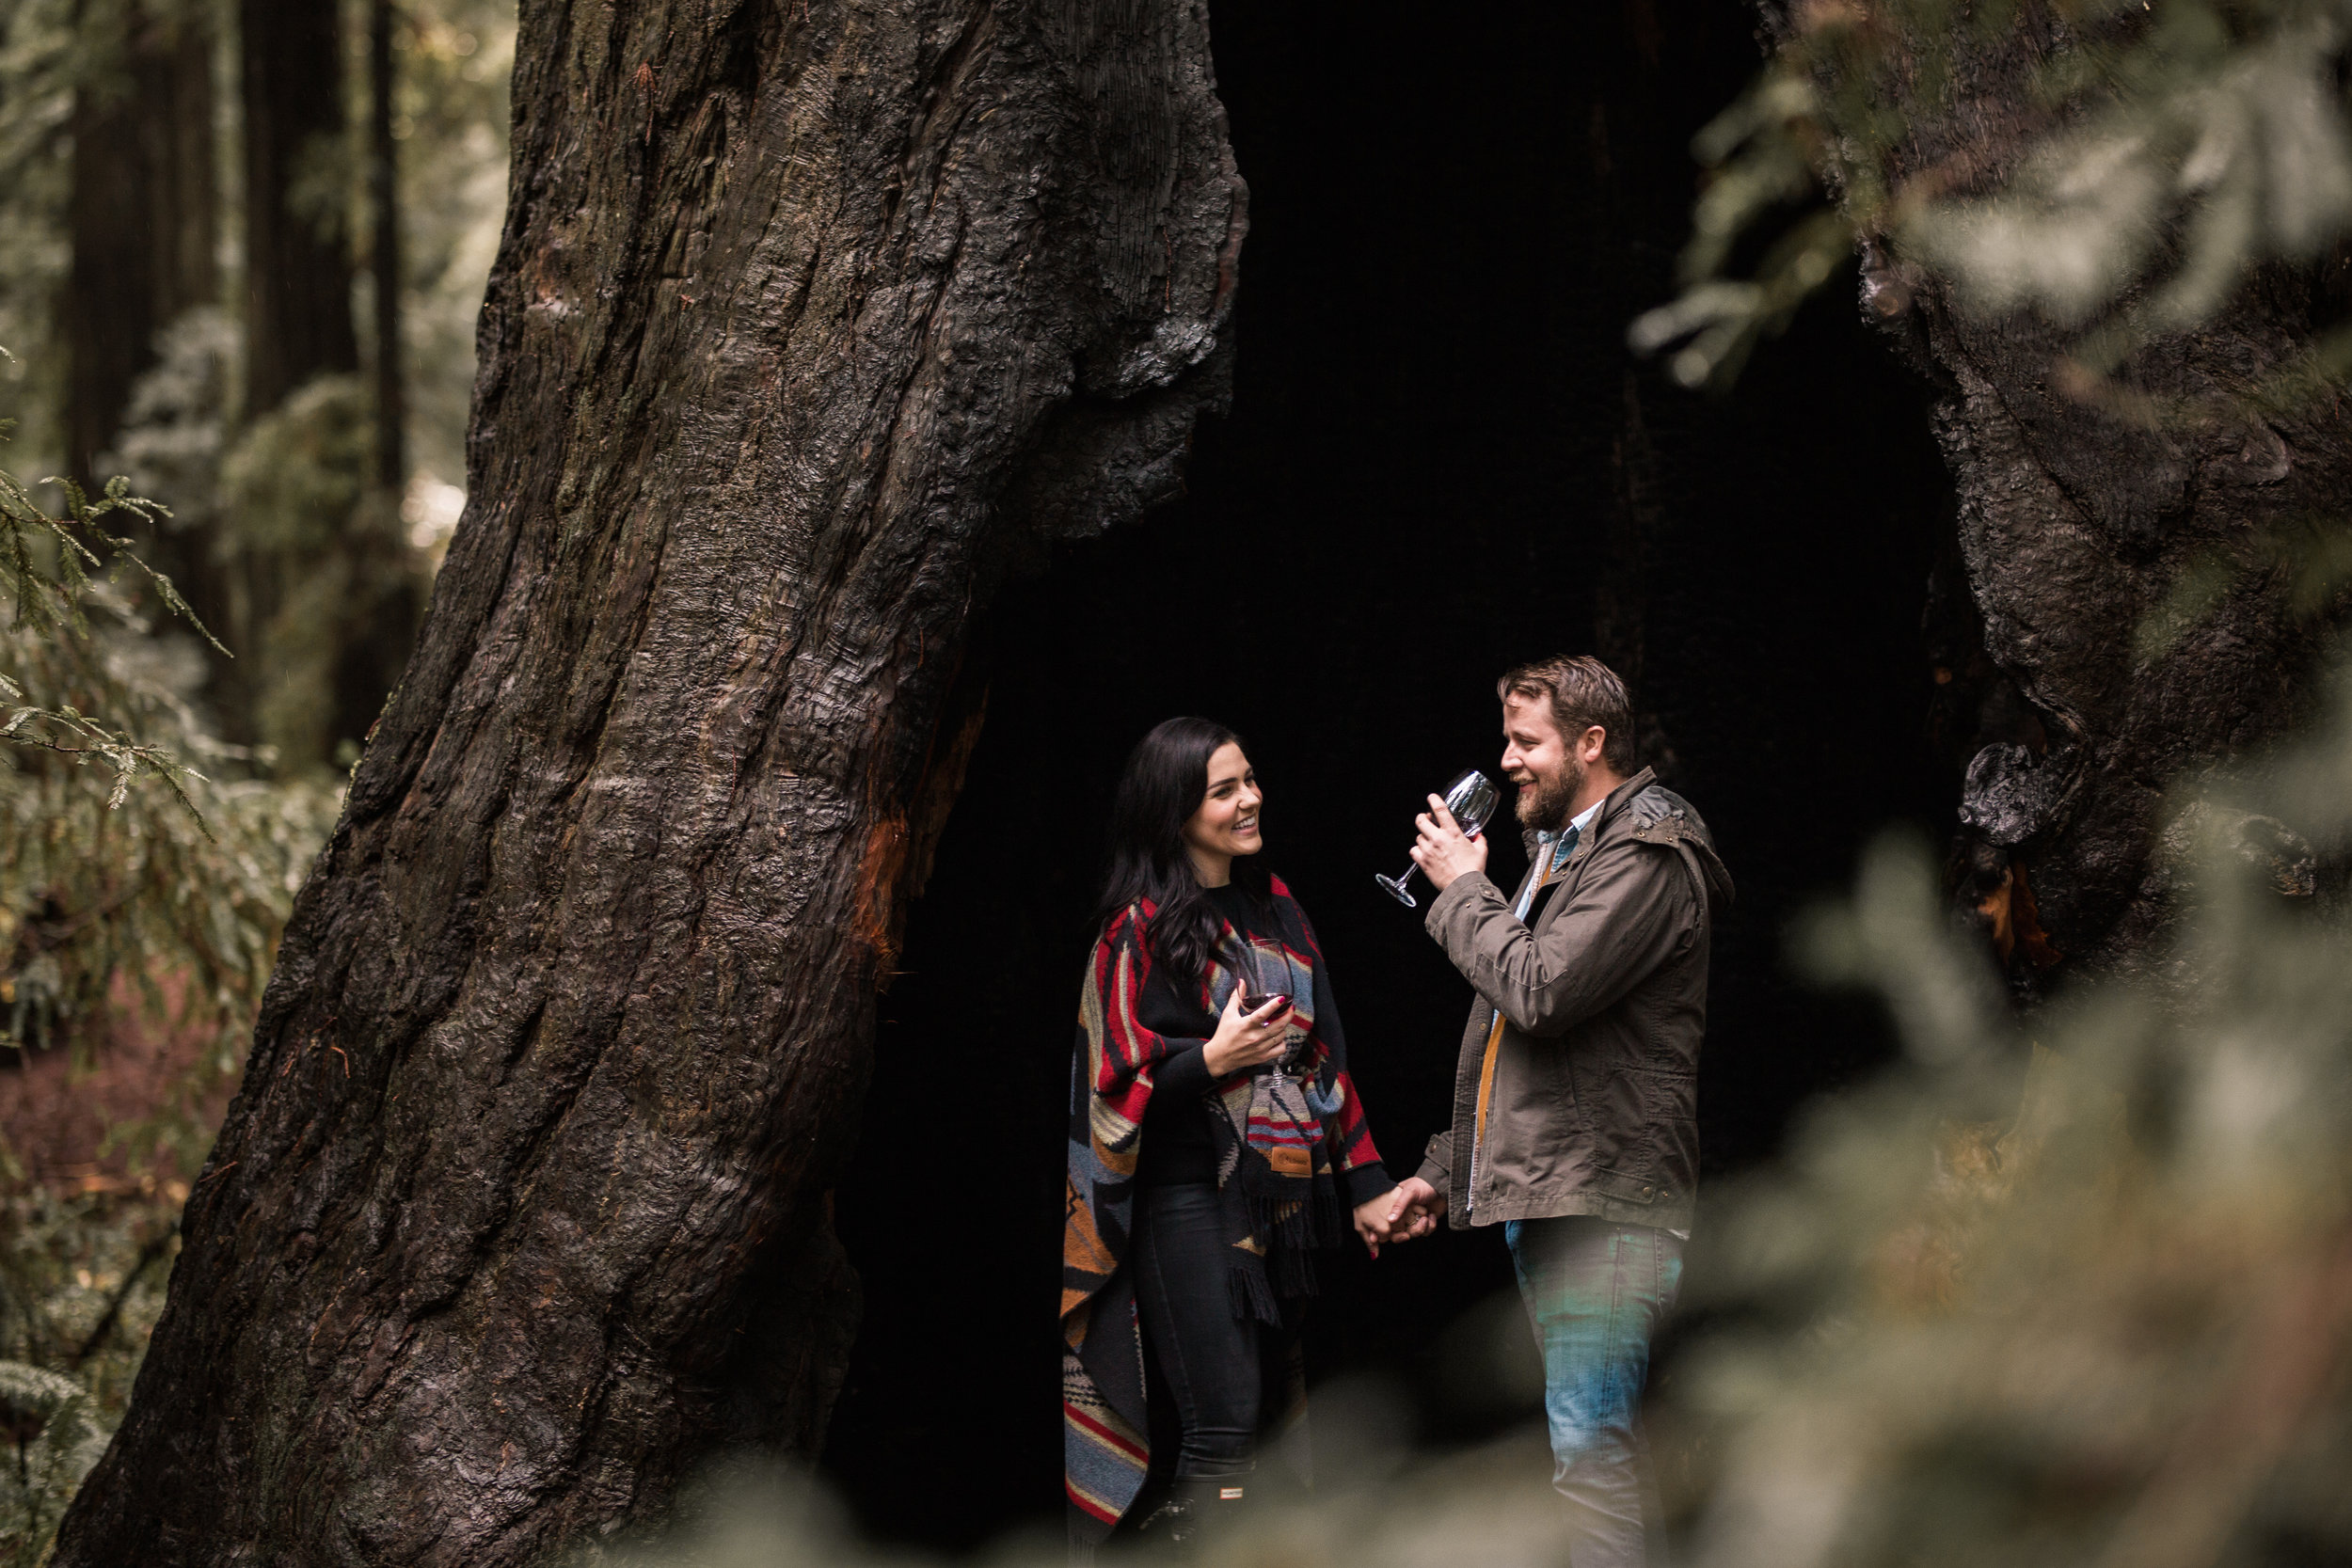 nicole-daacke-photography-redwoods-national-park-forest-rainy-foggy-adventure-engagement-session-humboldt-county-old-growth-redwood-tree-elopement-intimate-wedding-photographer-10.jpg